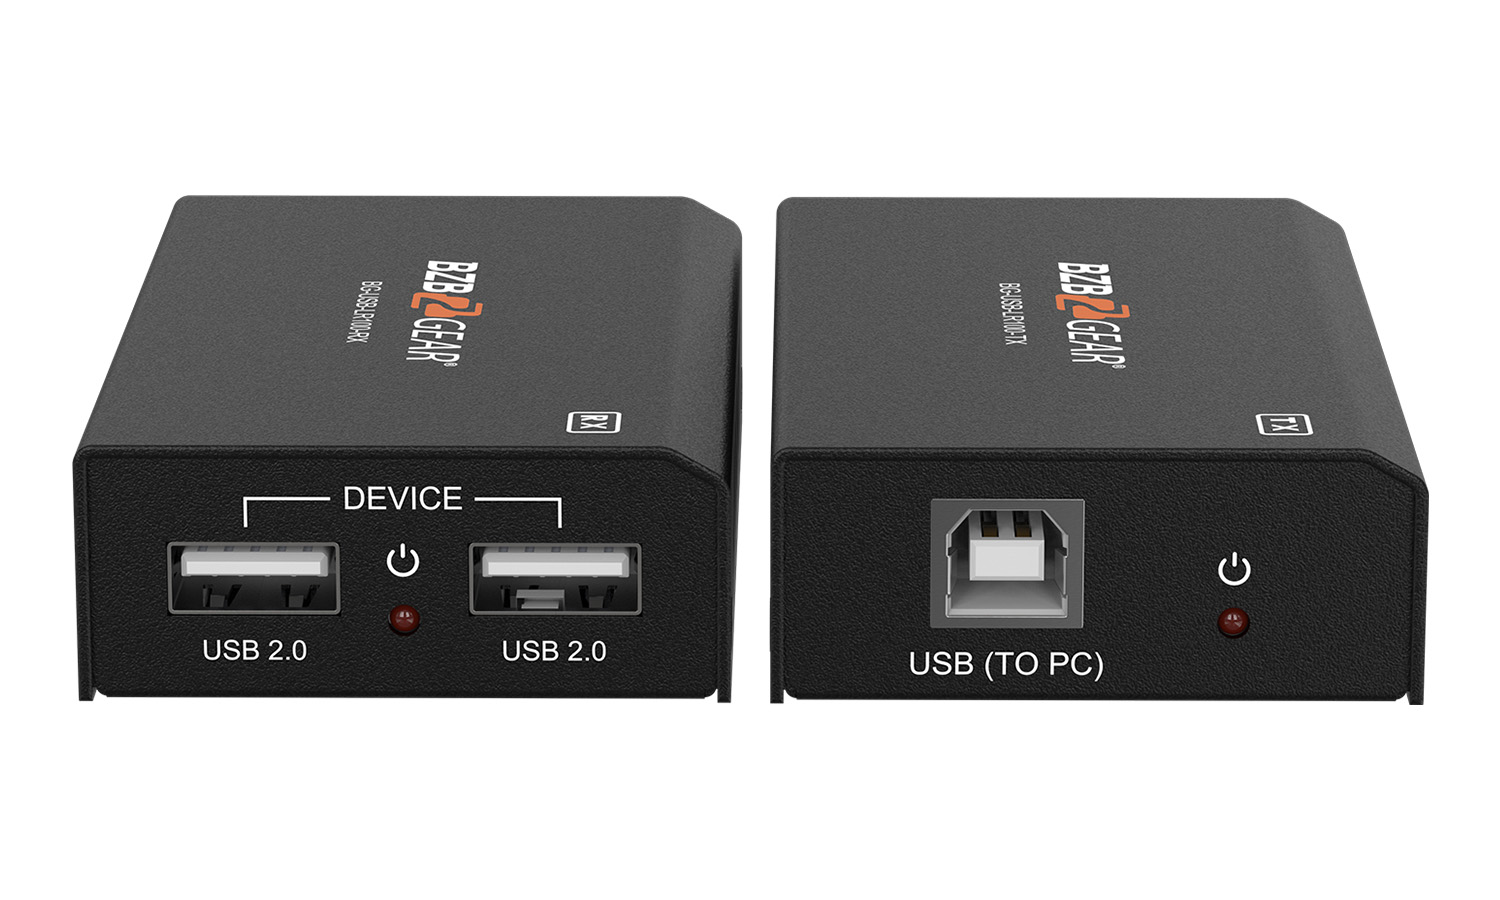 BG-USB-LR100 2-Port USB 2.0 Extender over a Single CAT5E/6/7 Cable up to 330ft by BZBGEAR